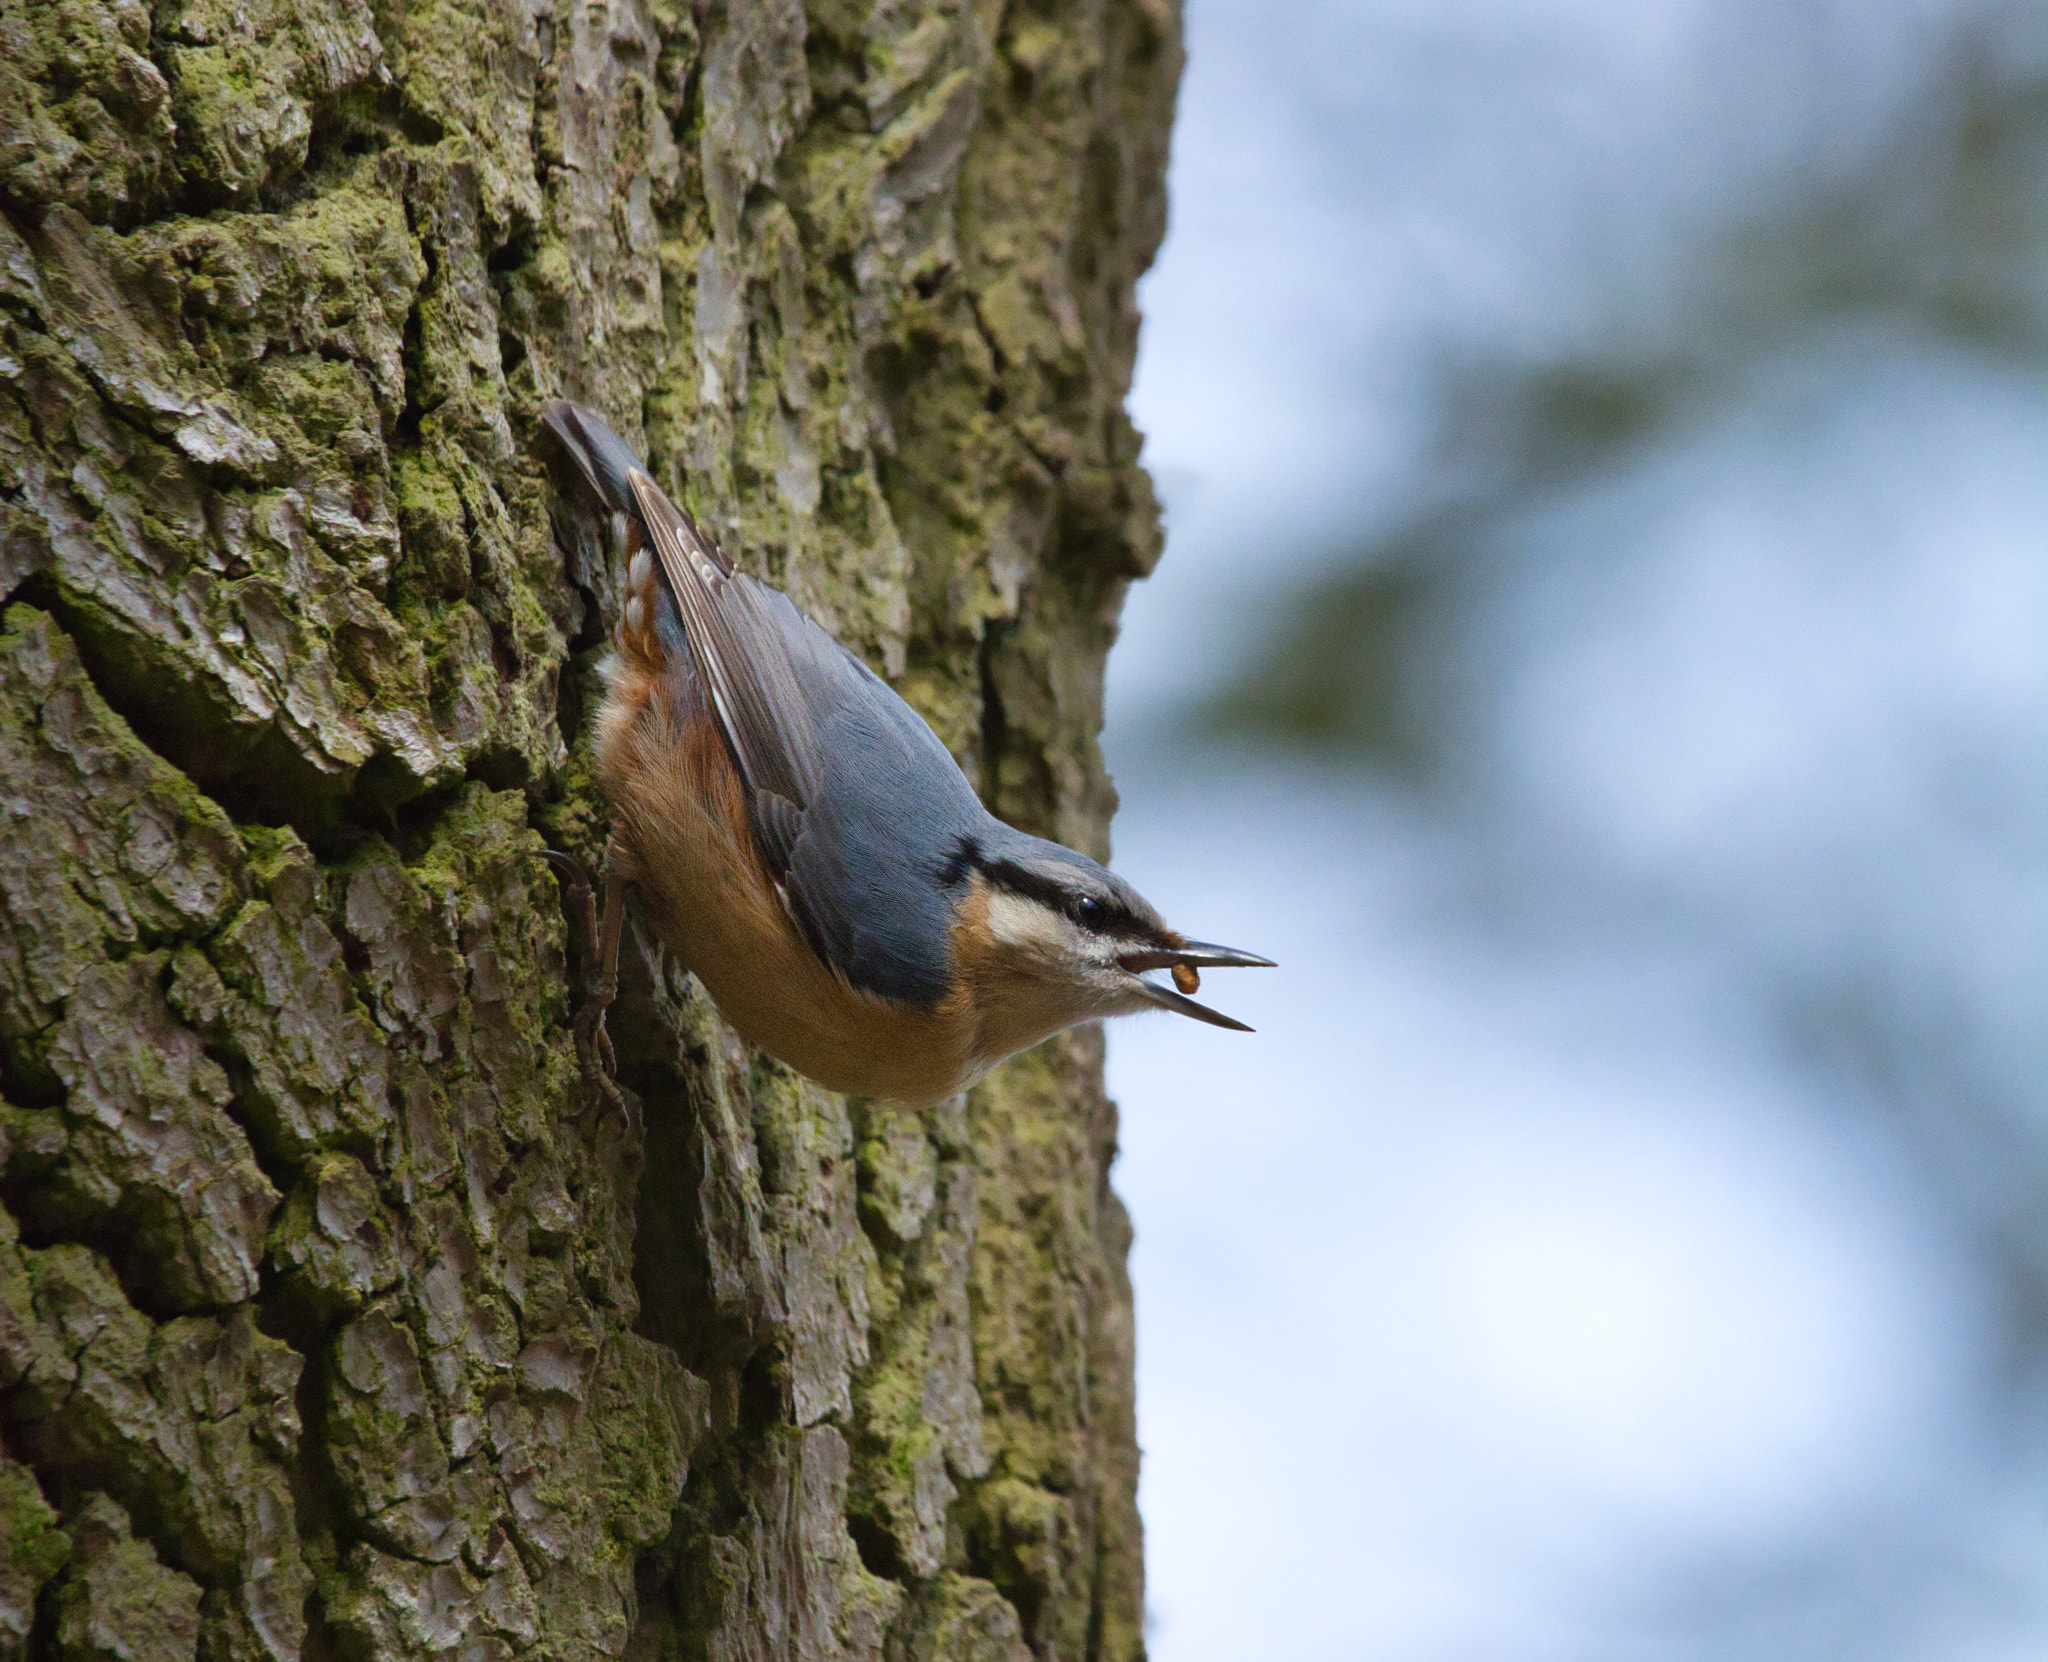 Nikon D7100 + Sigma 150-600mm F5-6.3 DG OS HSM | C sample photo. Nuthatch flick and swallow photography